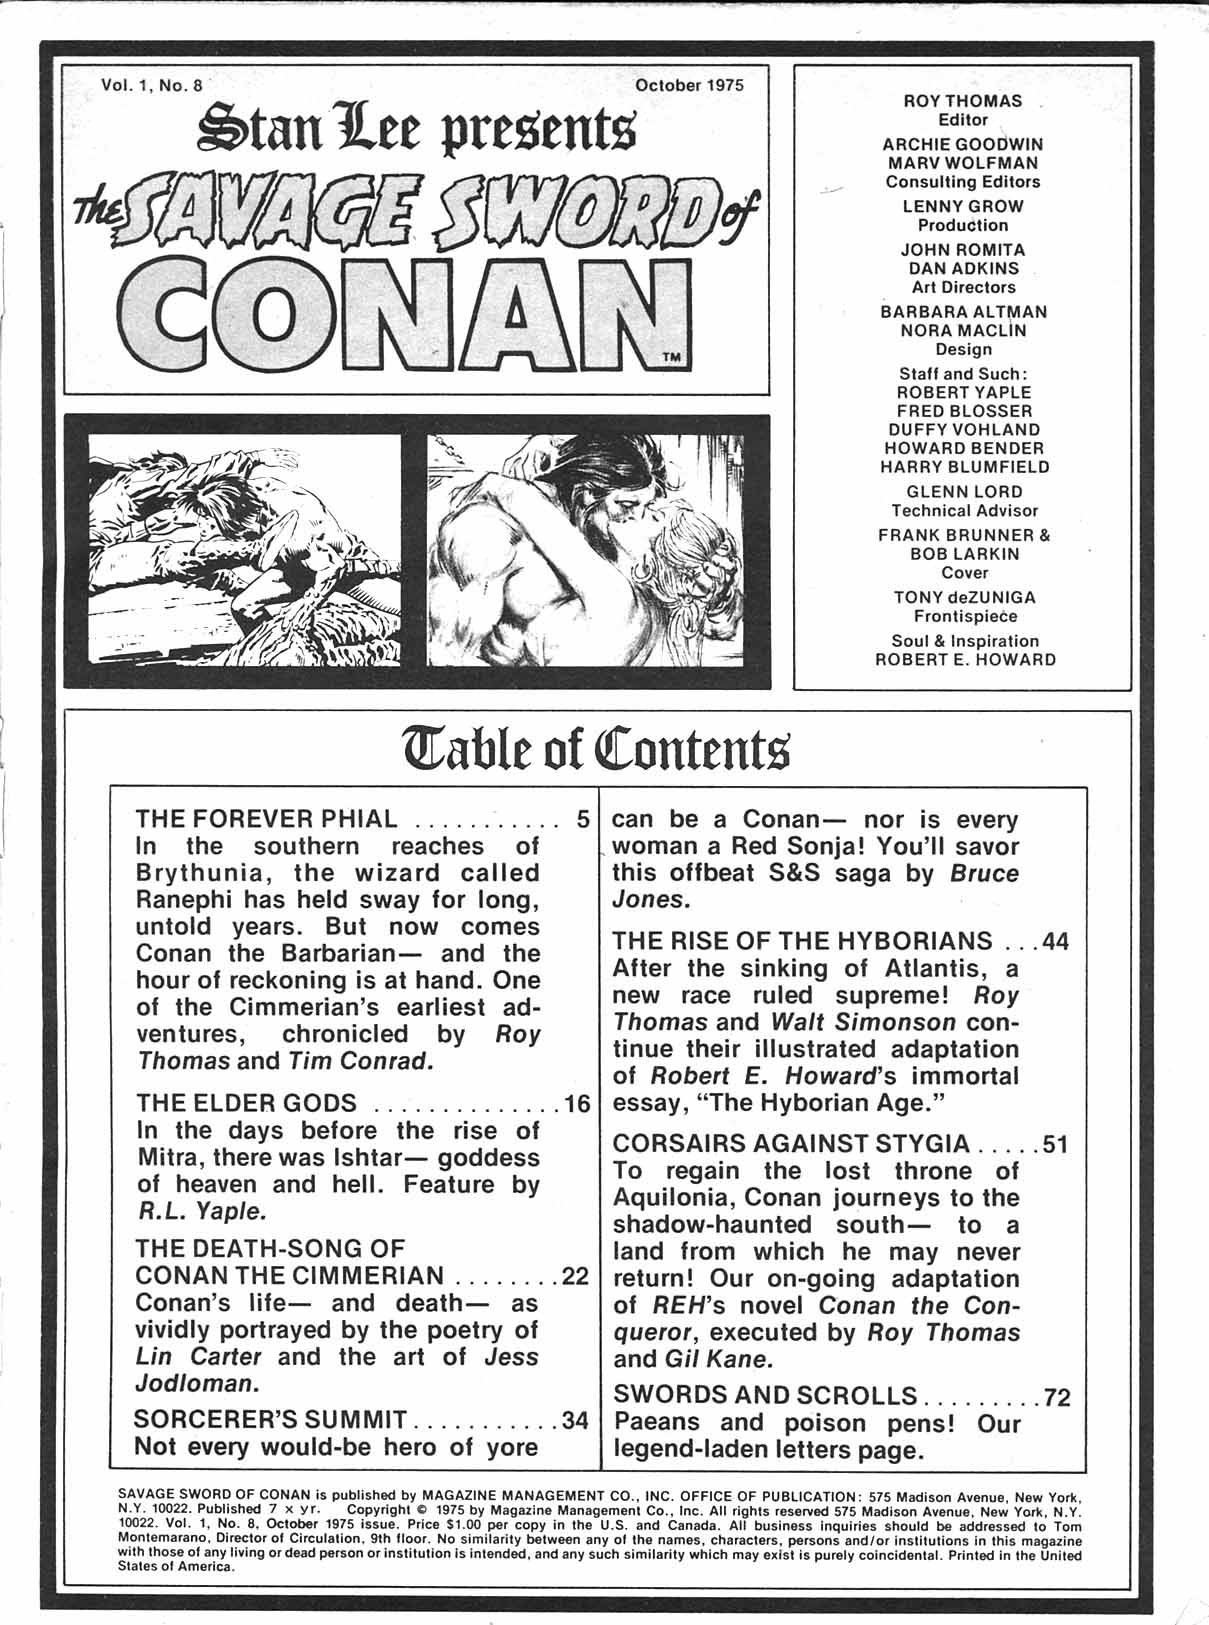 Read online The Savage Sword Of Conan comic -  Issue #8 - 3